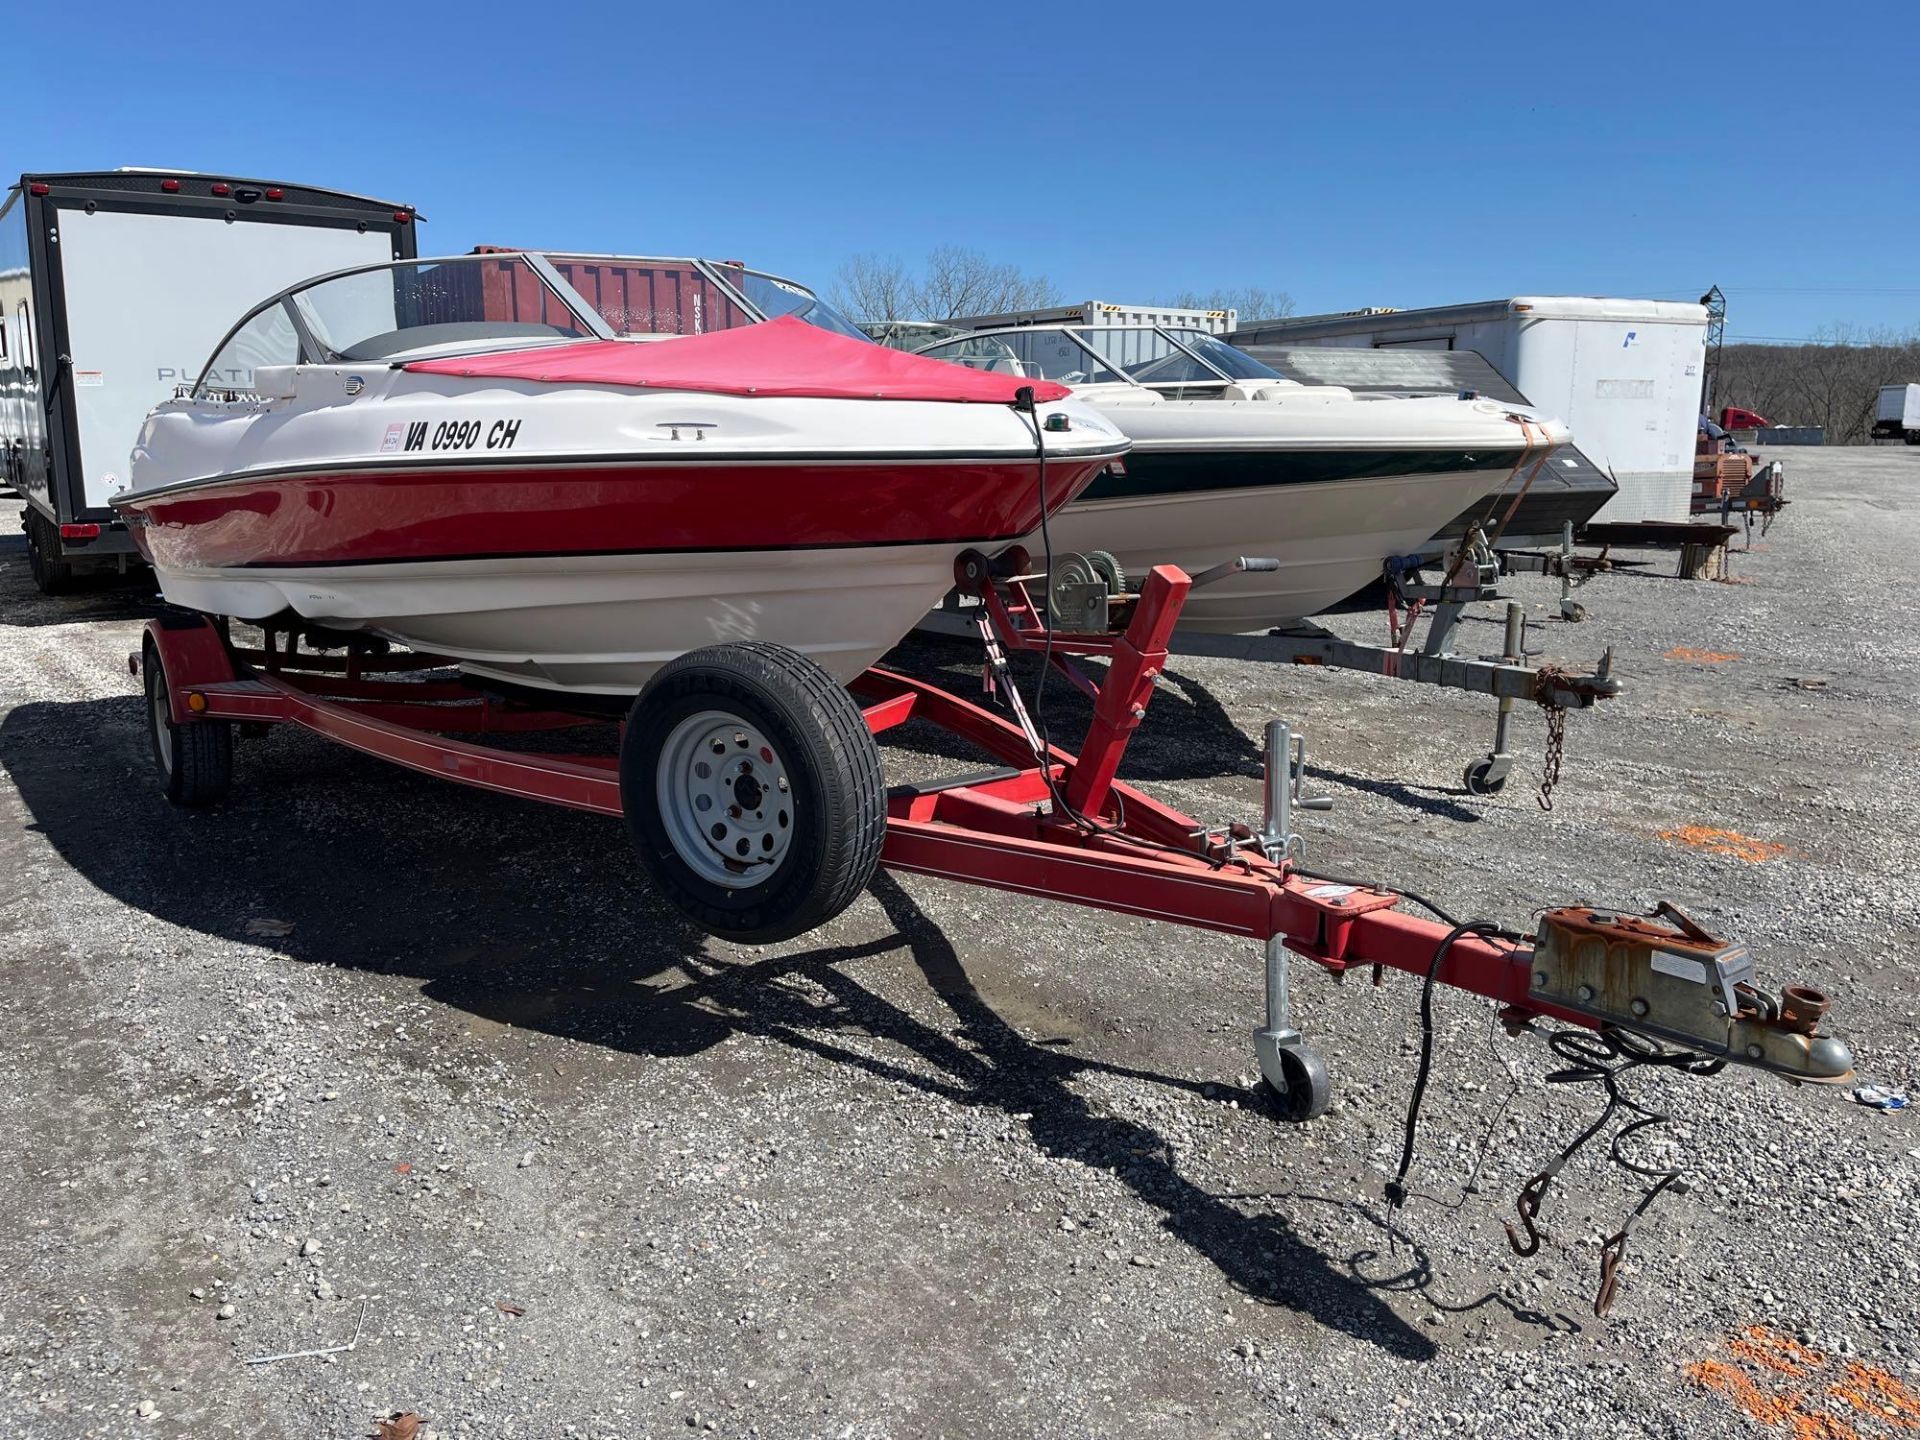 2005 Regal 1800 Boat And Marine Trailer - Image 4 of 16